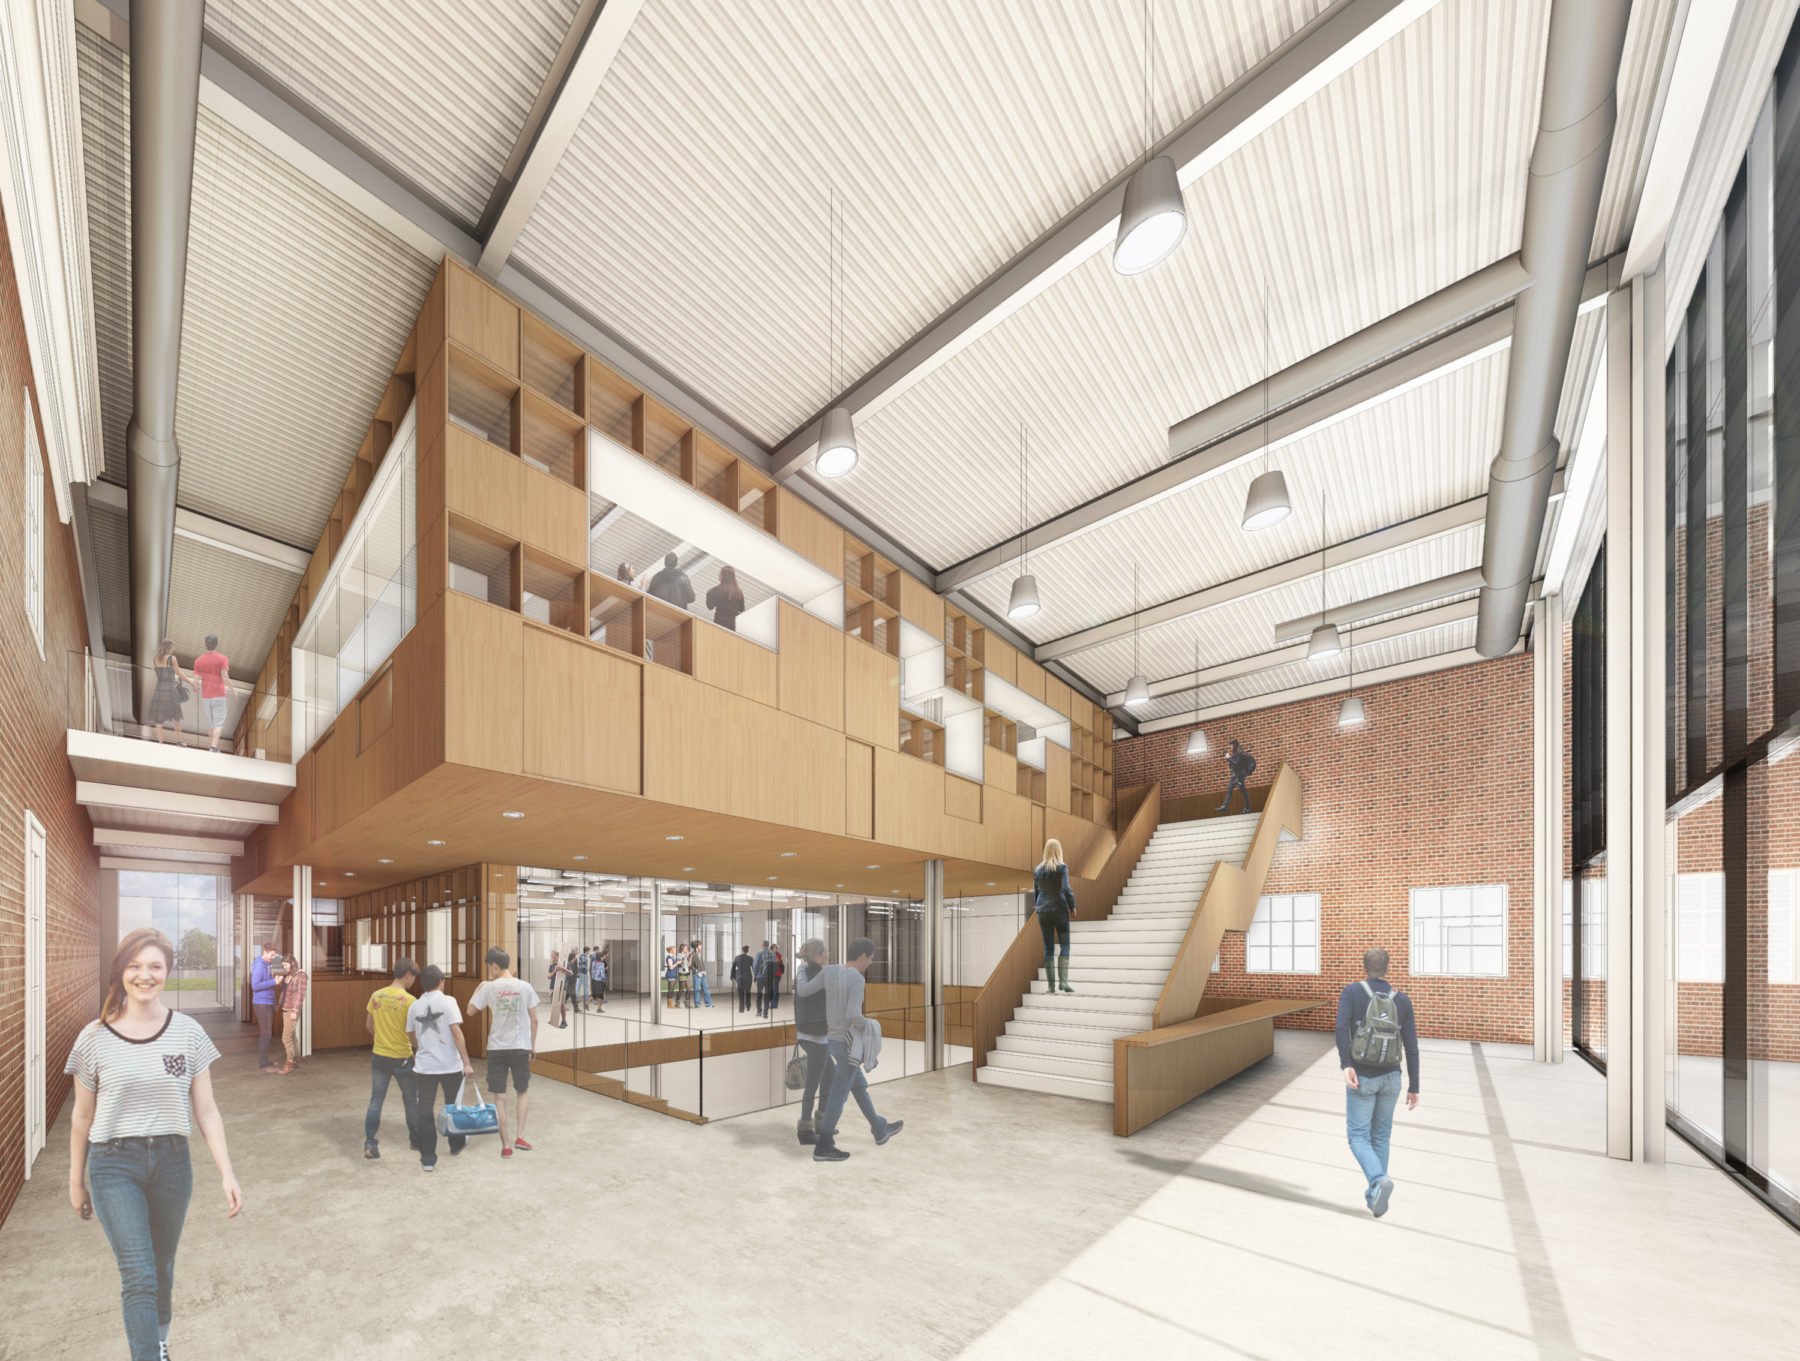 rendering of building interior with students walking around